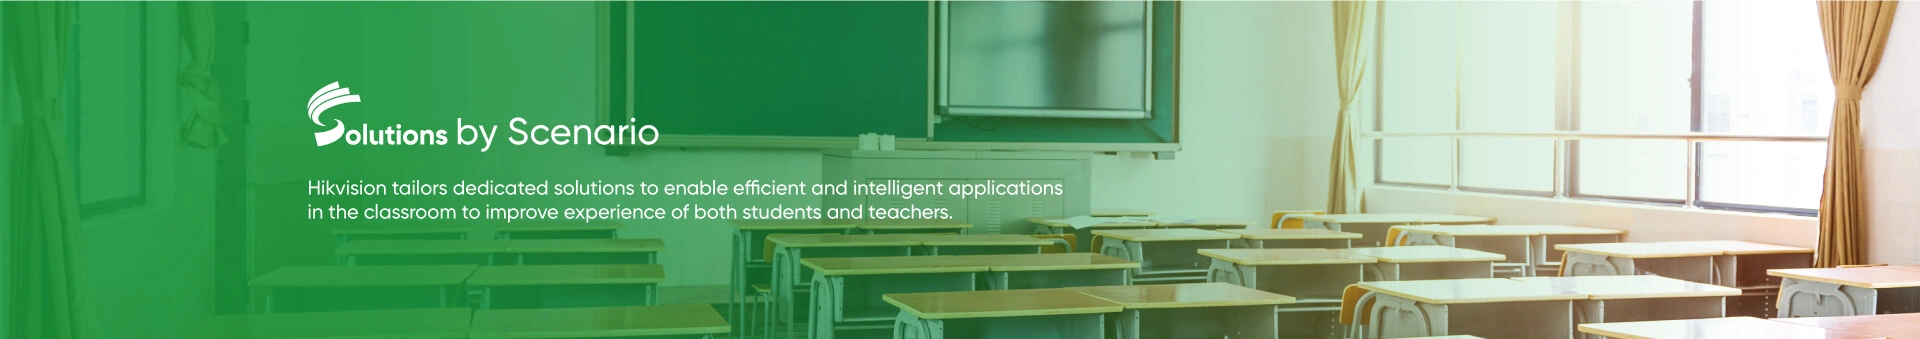 Hikvision tailors dedicated solutions to enable efficient and intelligent applications in the classroom to improve experience of both students and teachers